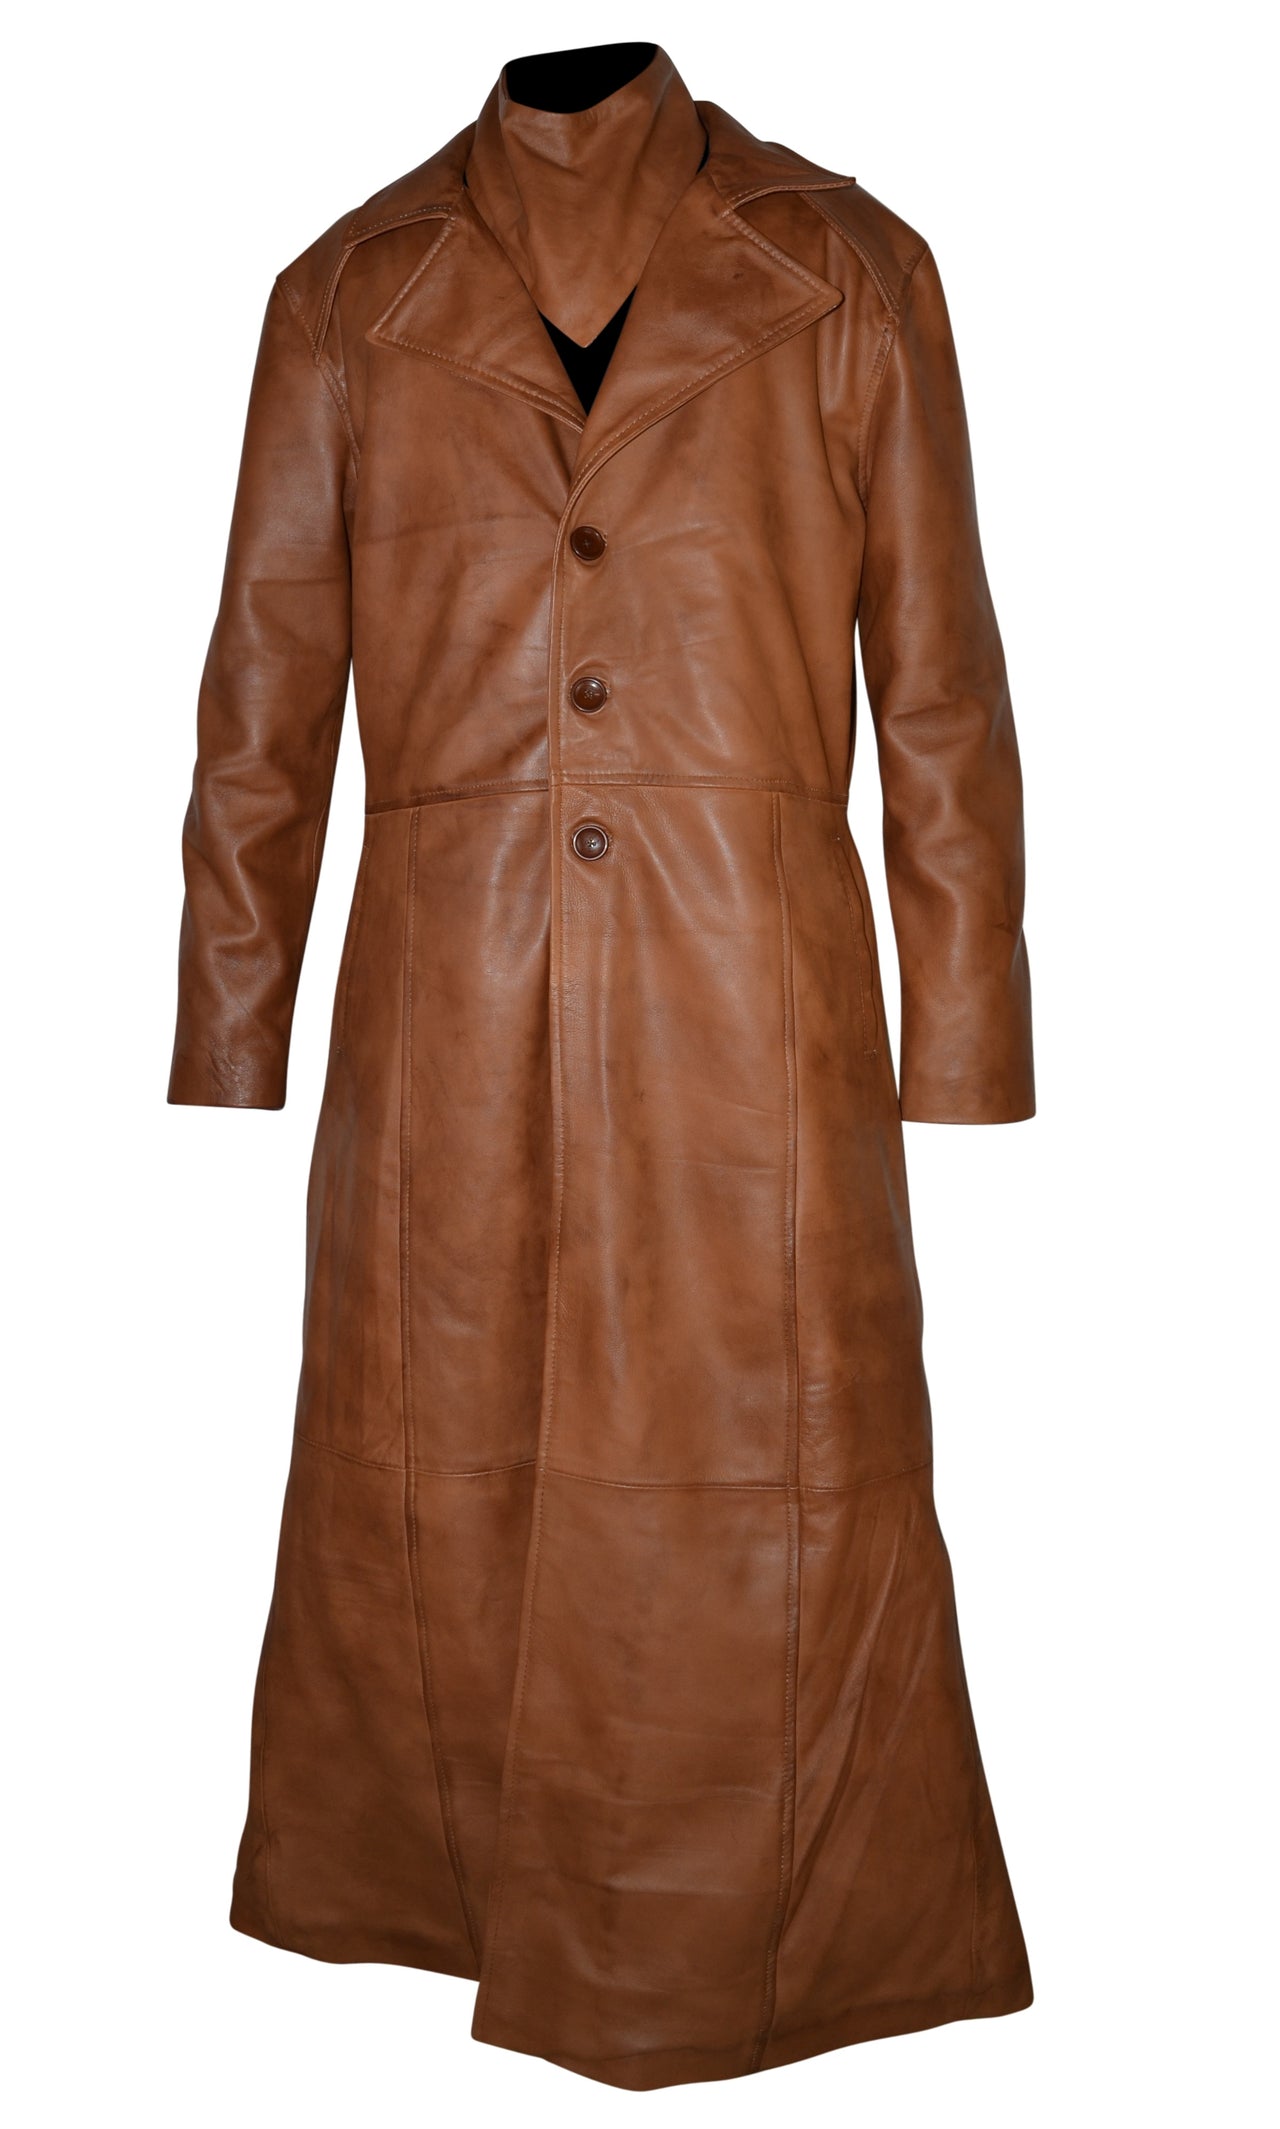 Mens Single Breasted Waxed Brown Long Leather Coat